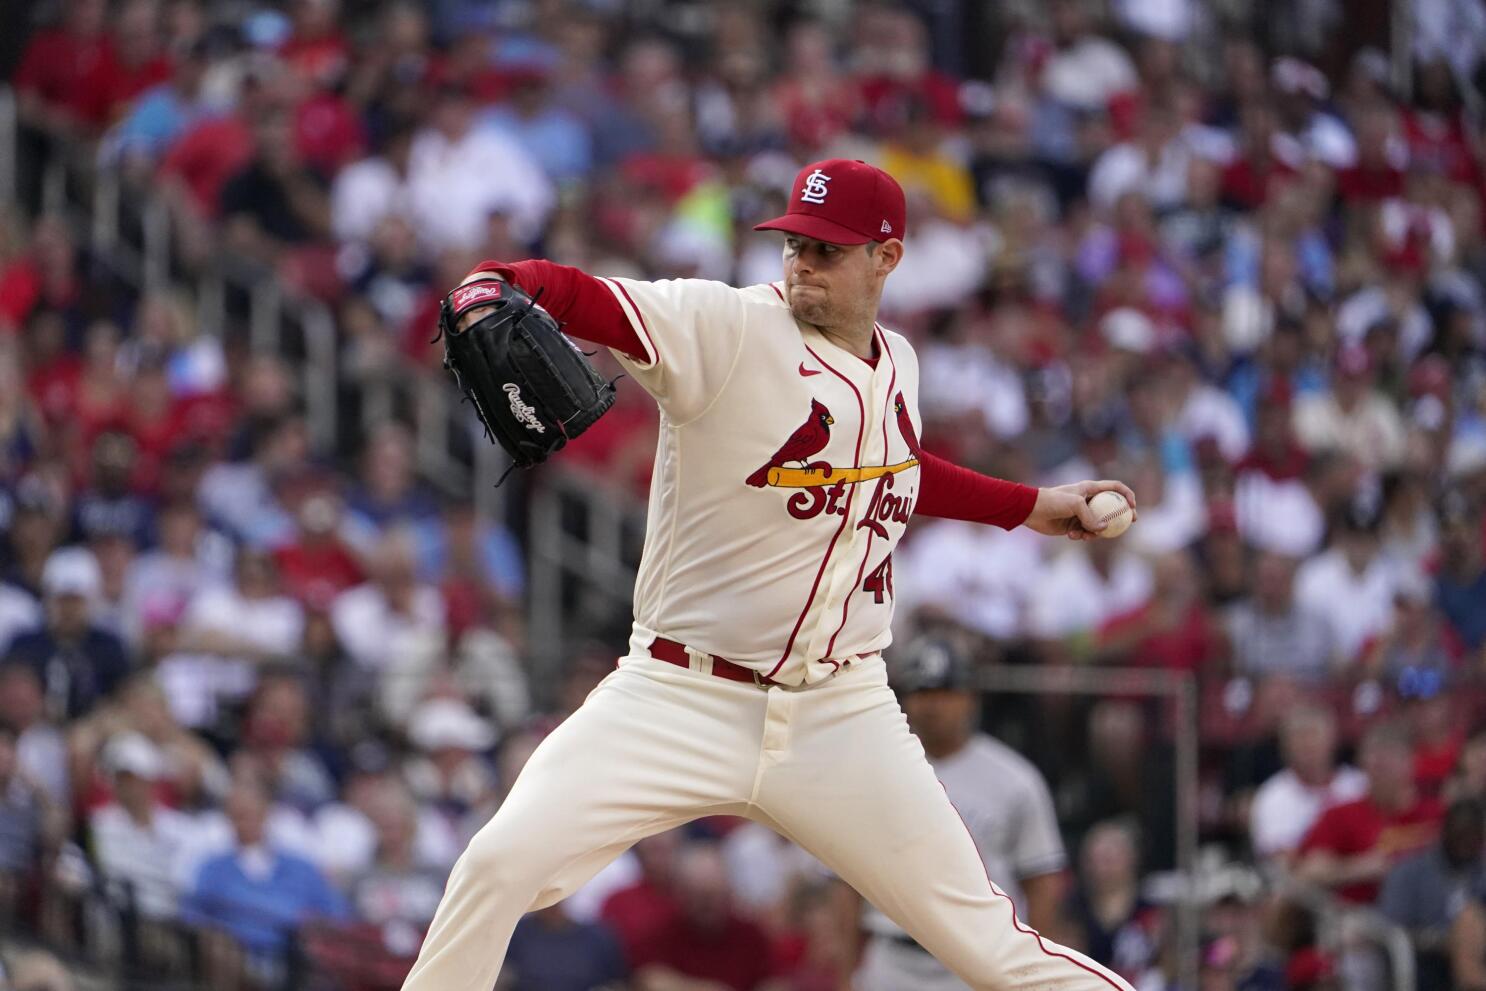 Jordan Montgomery tosses complete-game shutout for Cardinals